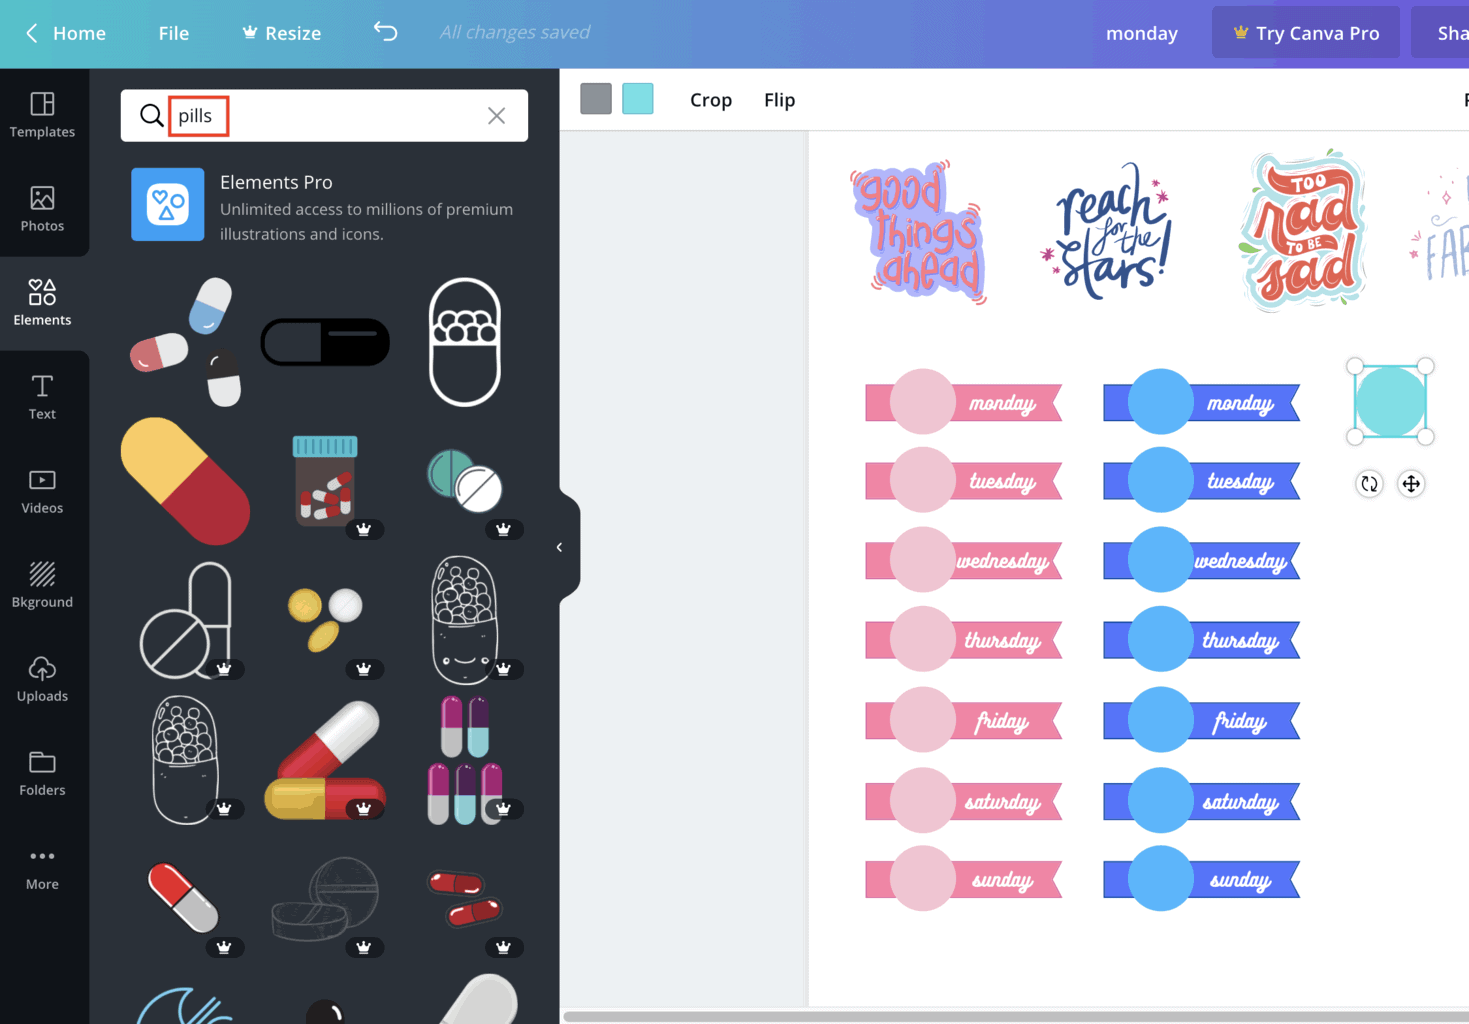 How To Use Canva To Create Stickers | Masha Plans